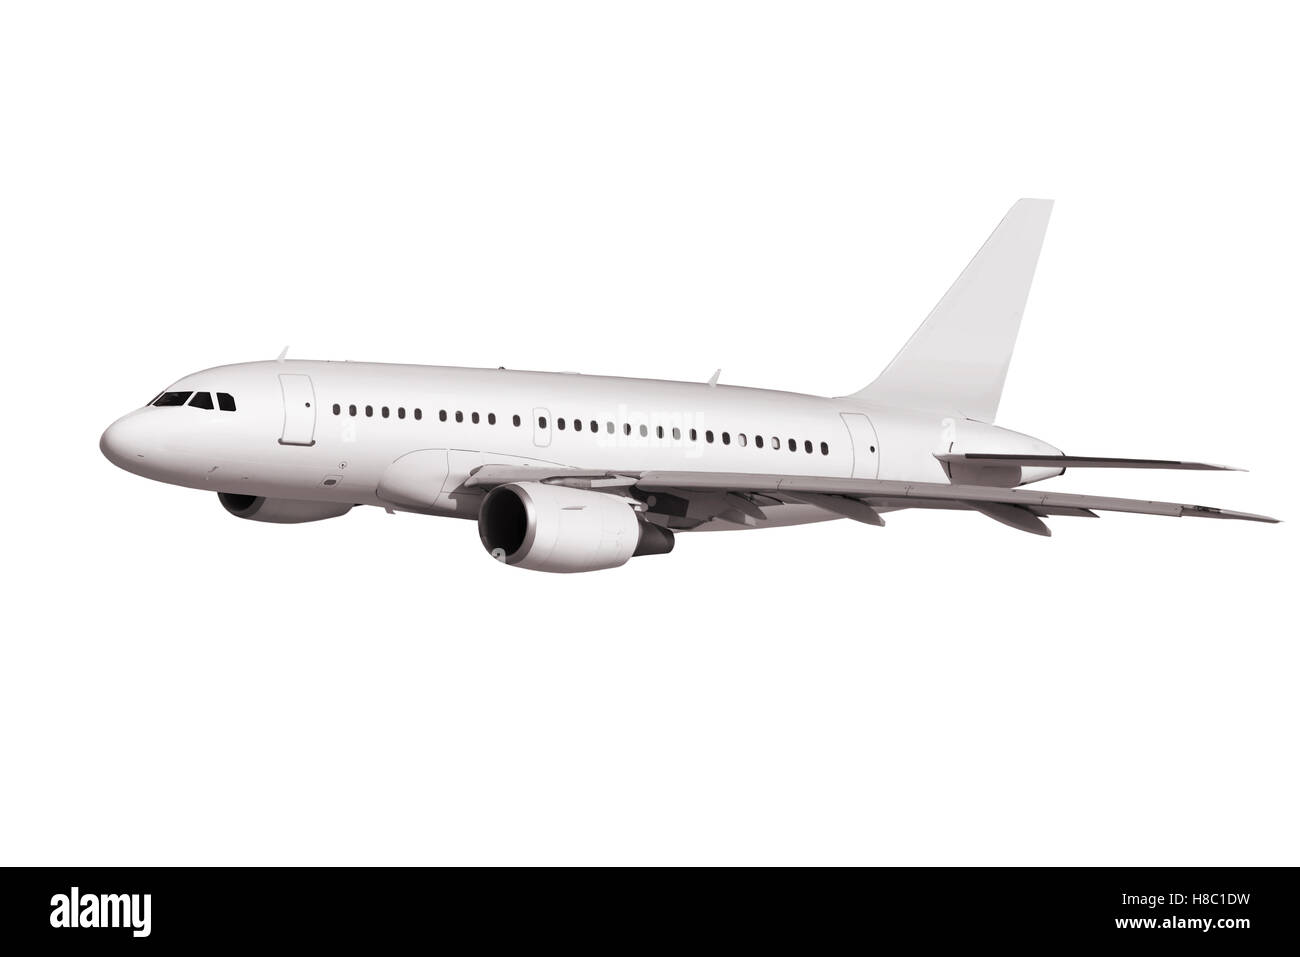 commercial airplane isolated on white background Stock Photo